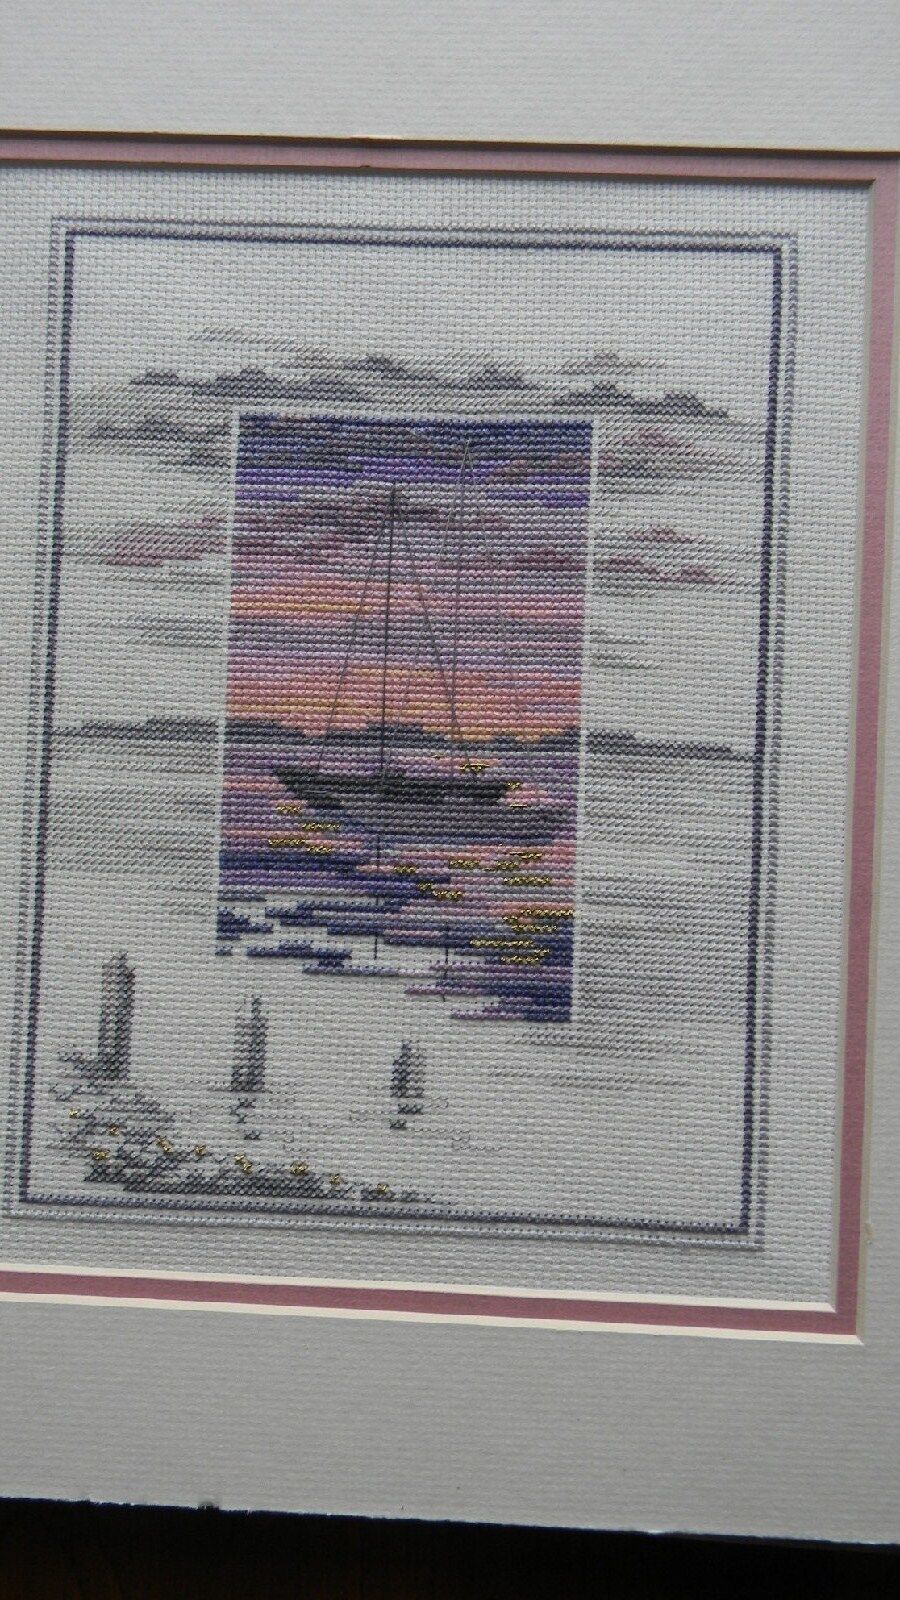 Completed SWALWELL Needle Treasures Cross Stitch SUNSET - WATER\'S EDGE - JCA New